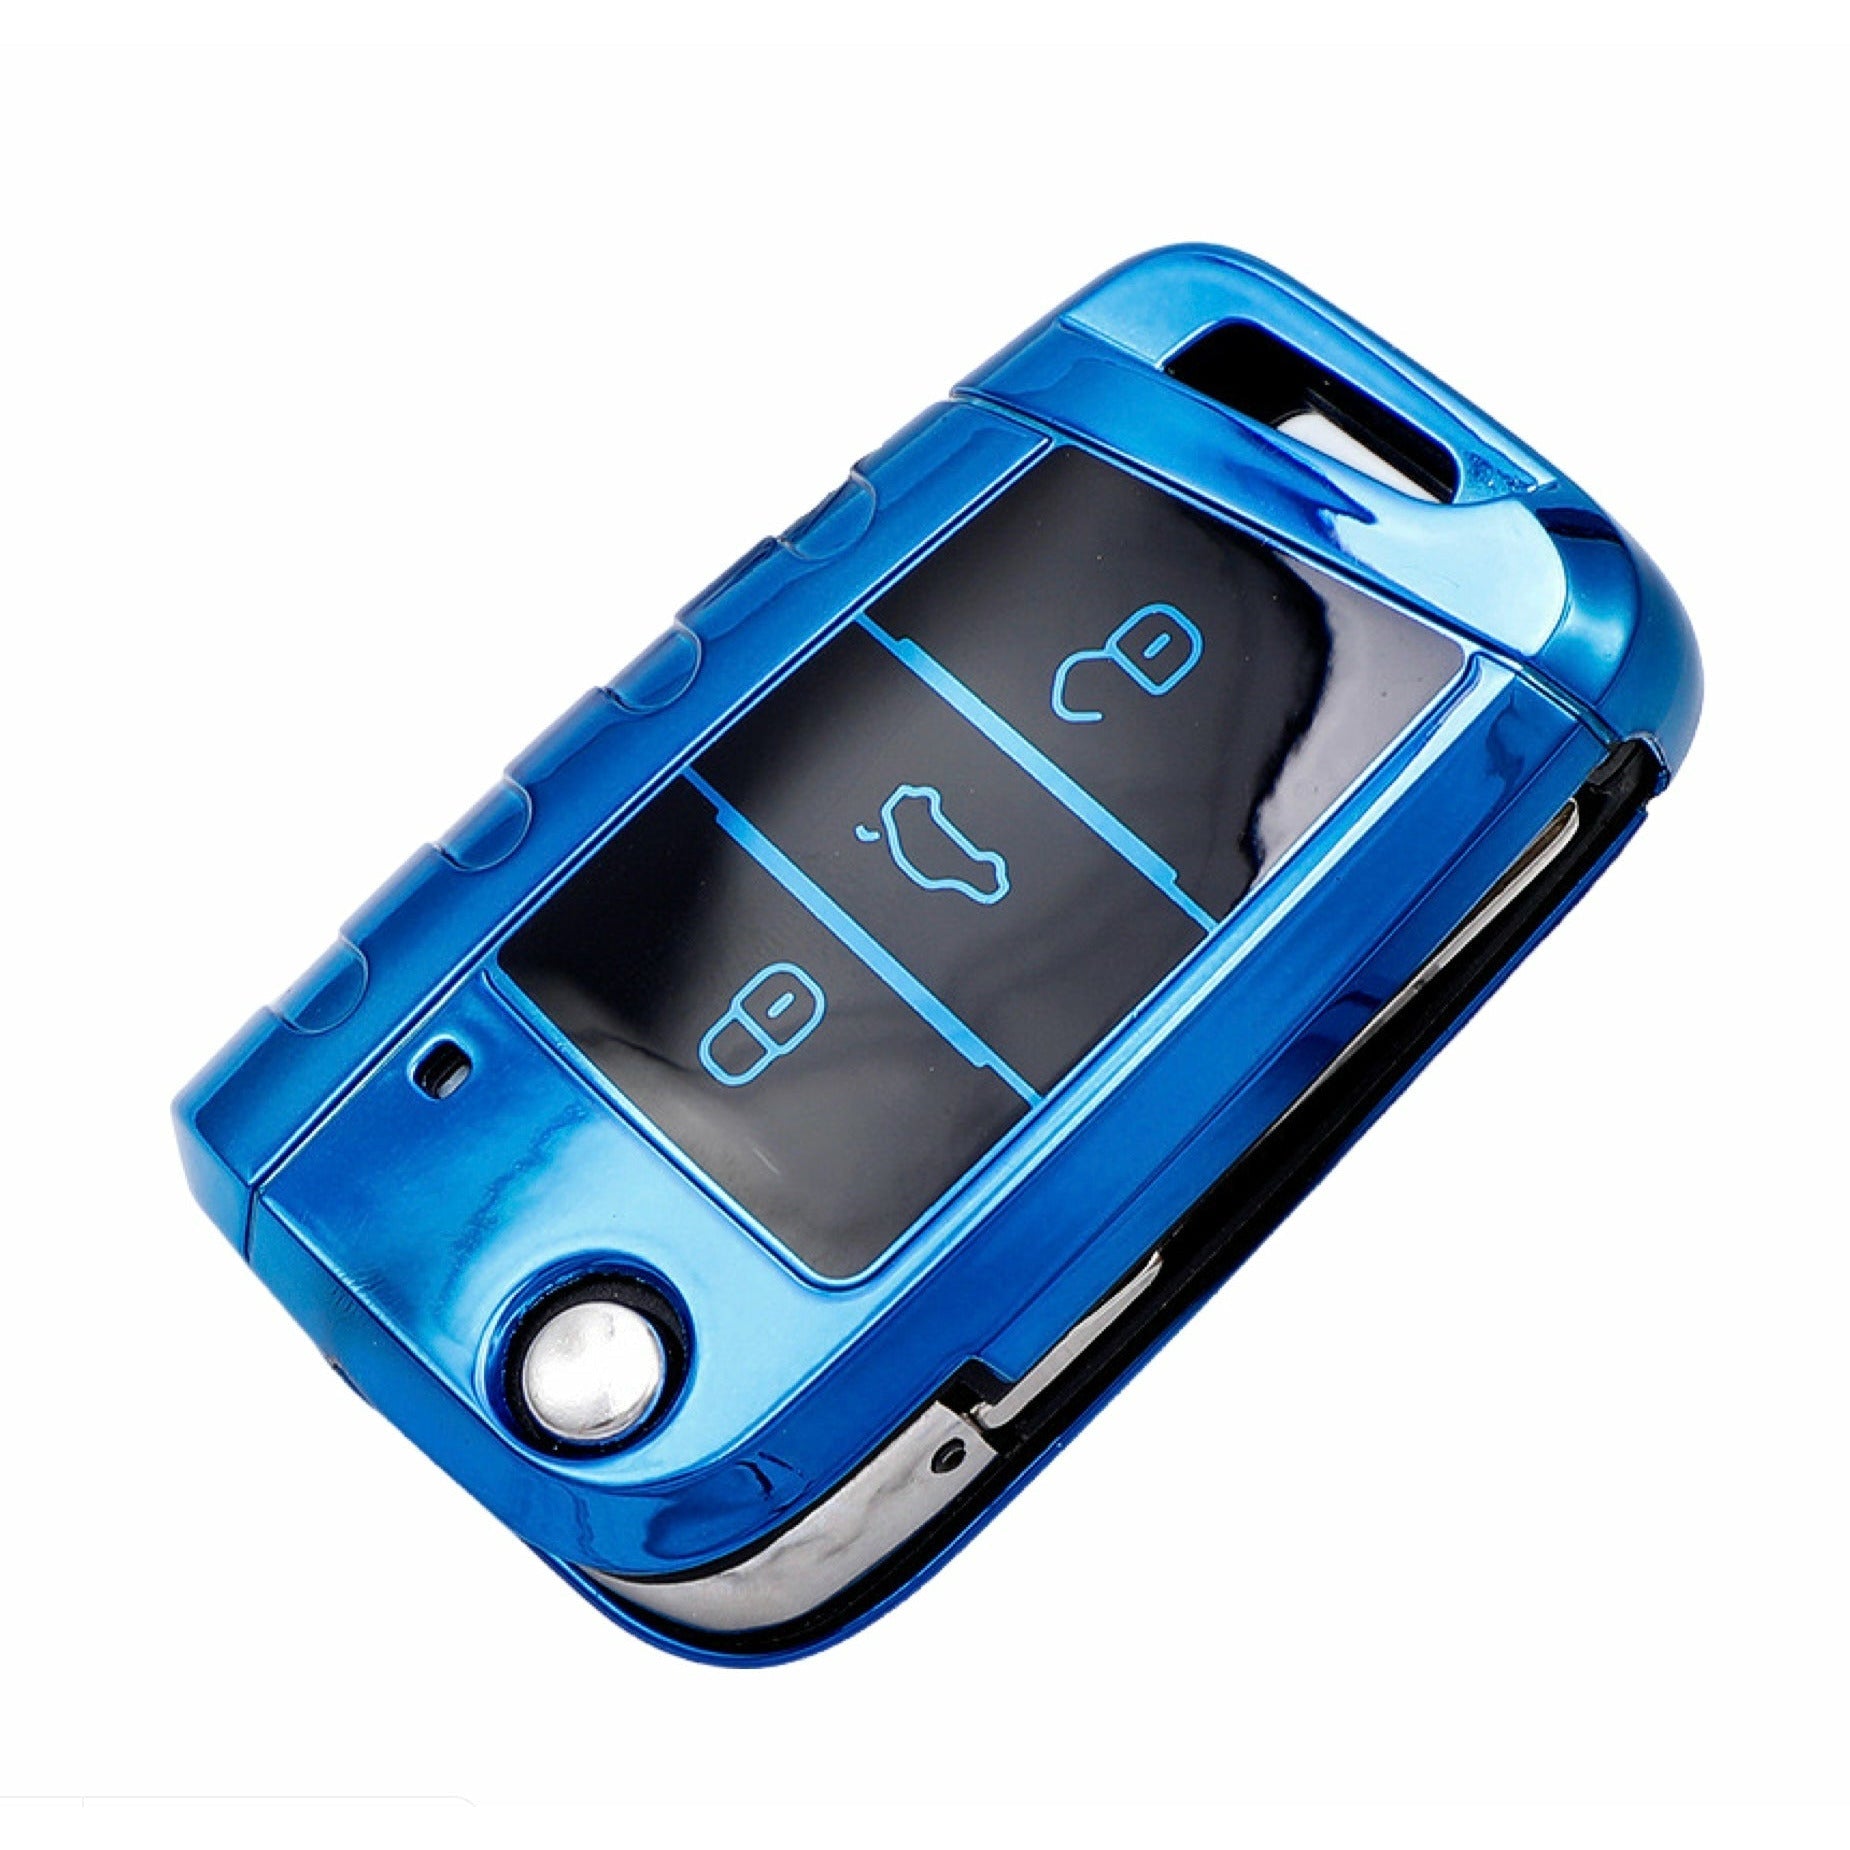 Volkswagen car key cover blue | Key fob cover for VW Golf, Passat, Polo, Tiguan, Touareg.| volkswagen accessories - Keysleeves